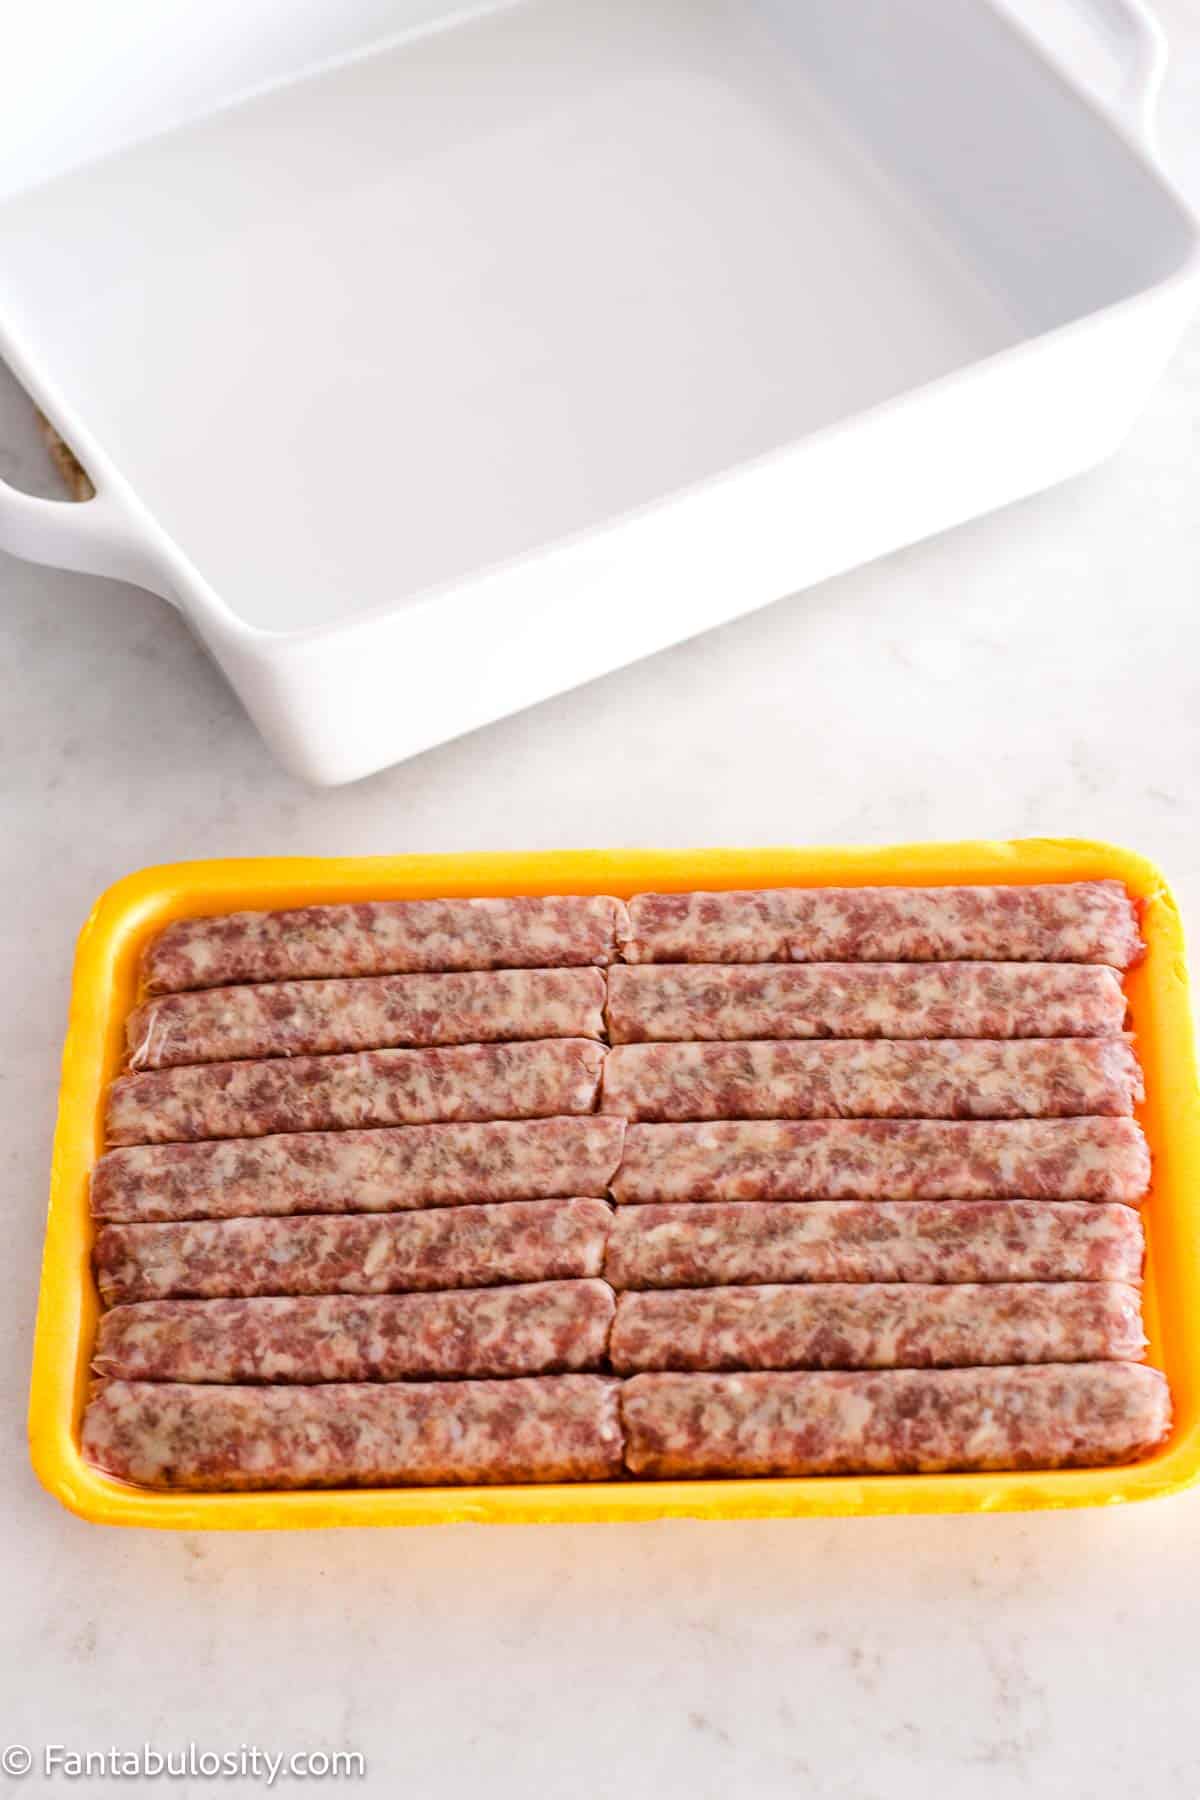 Raw, breakfast sausage links sitting on counter, next to baking dish.